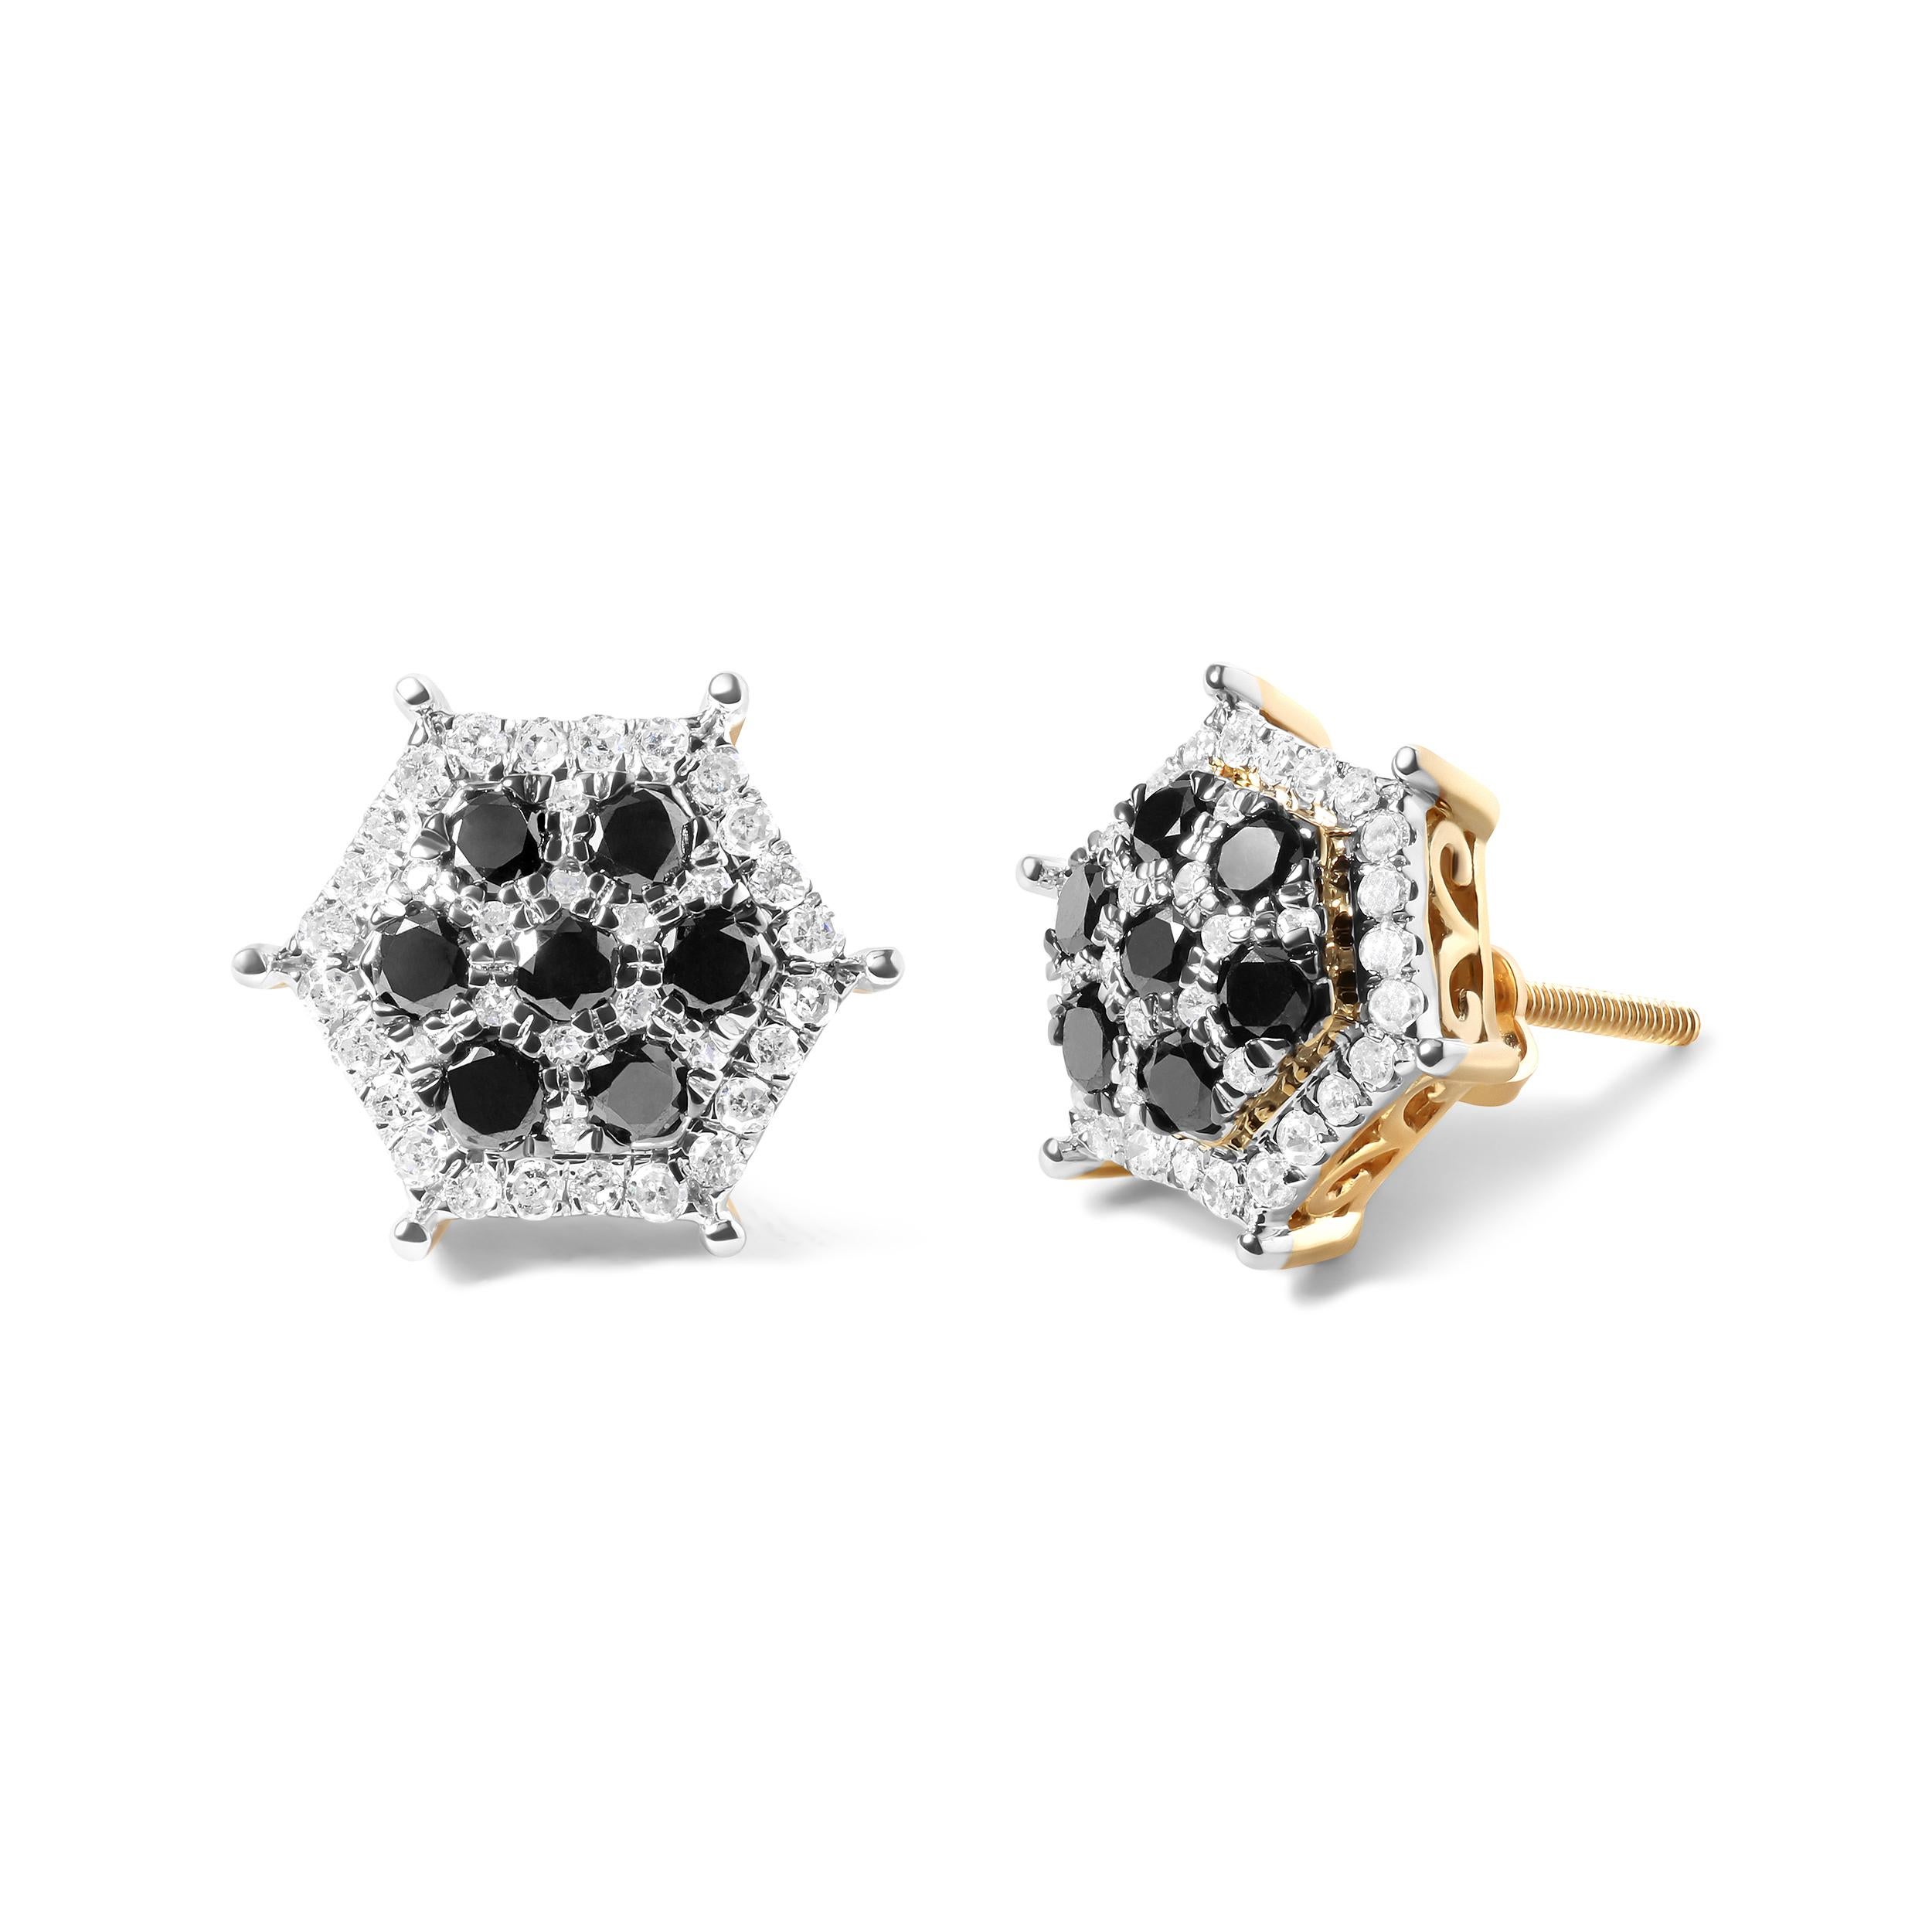 Indulge in the luxury and elegance of these stunning diamond earrings, crafted from the finest 10K yellow gold. The perfect accessory for any stylish man, these earrings boast a total of 86 sparkling natural diamonds, including 14 black color